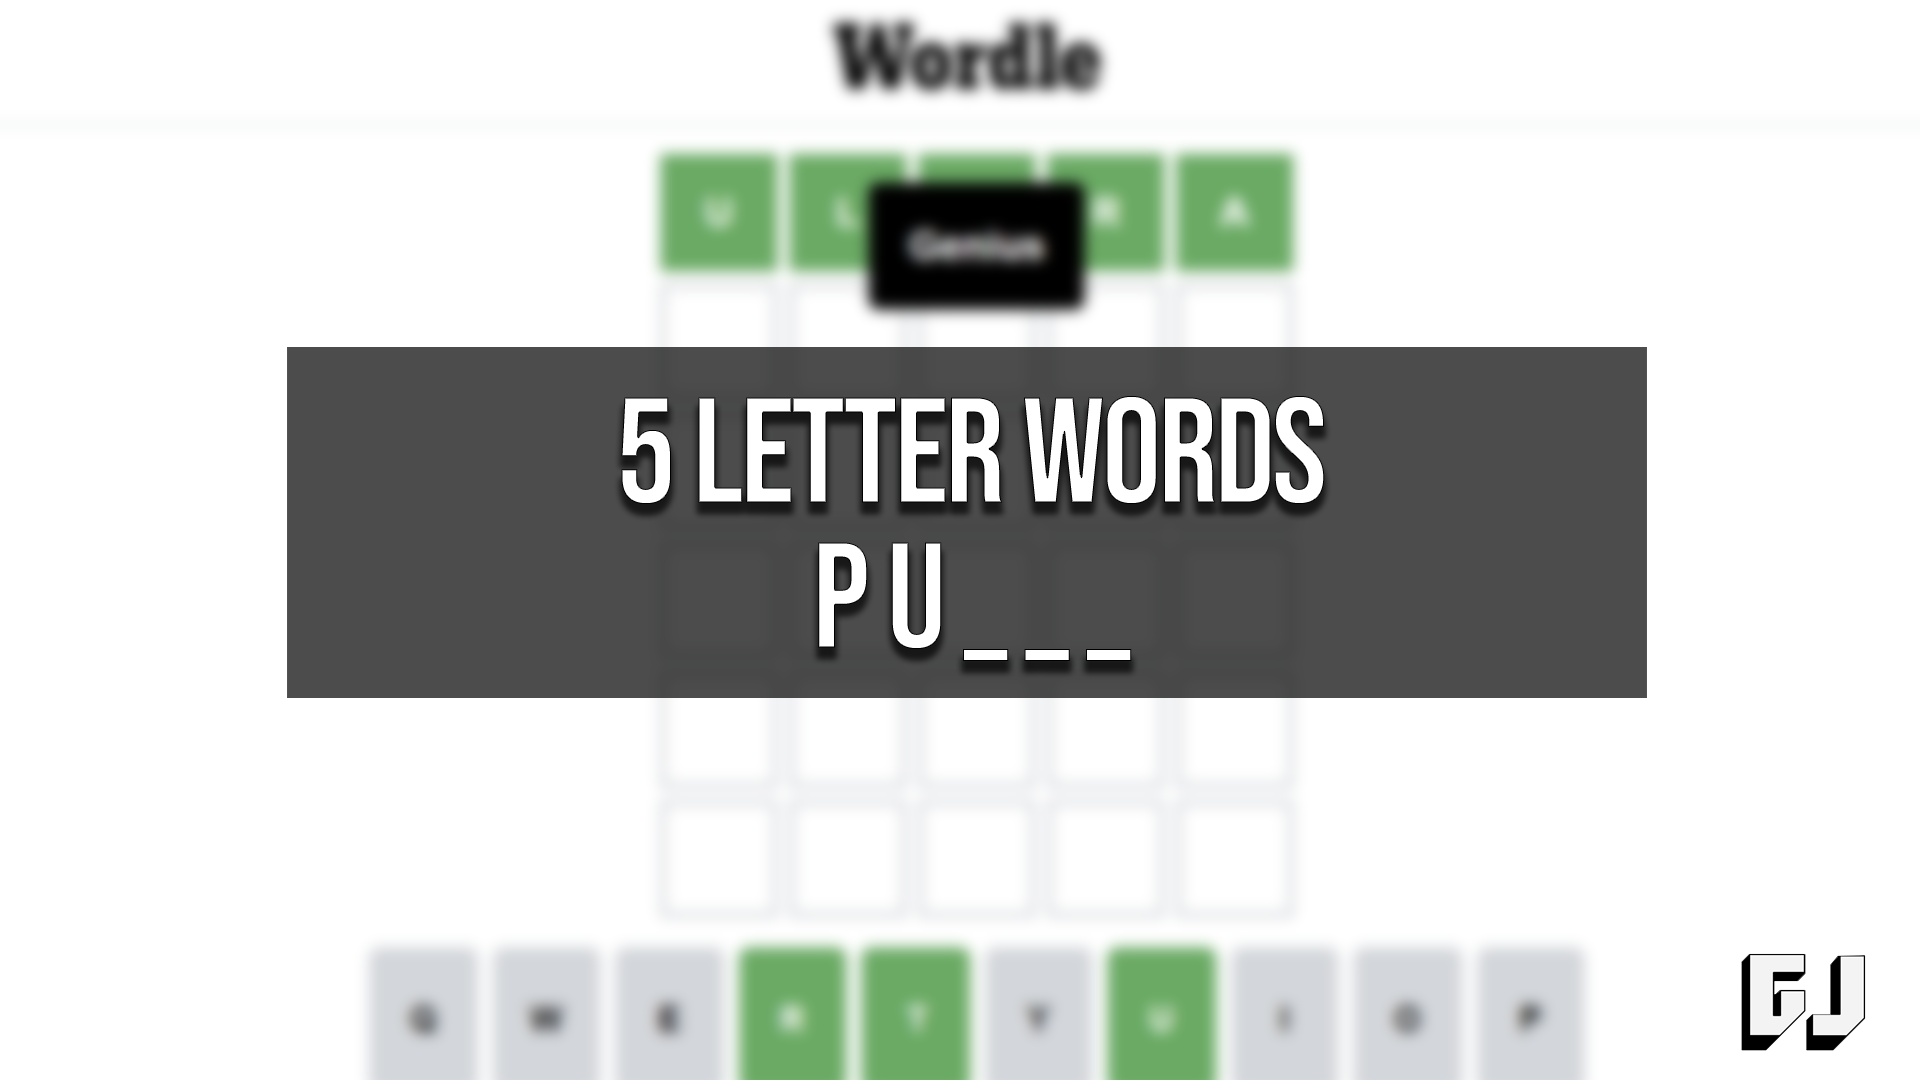 5 letter words that start with p u